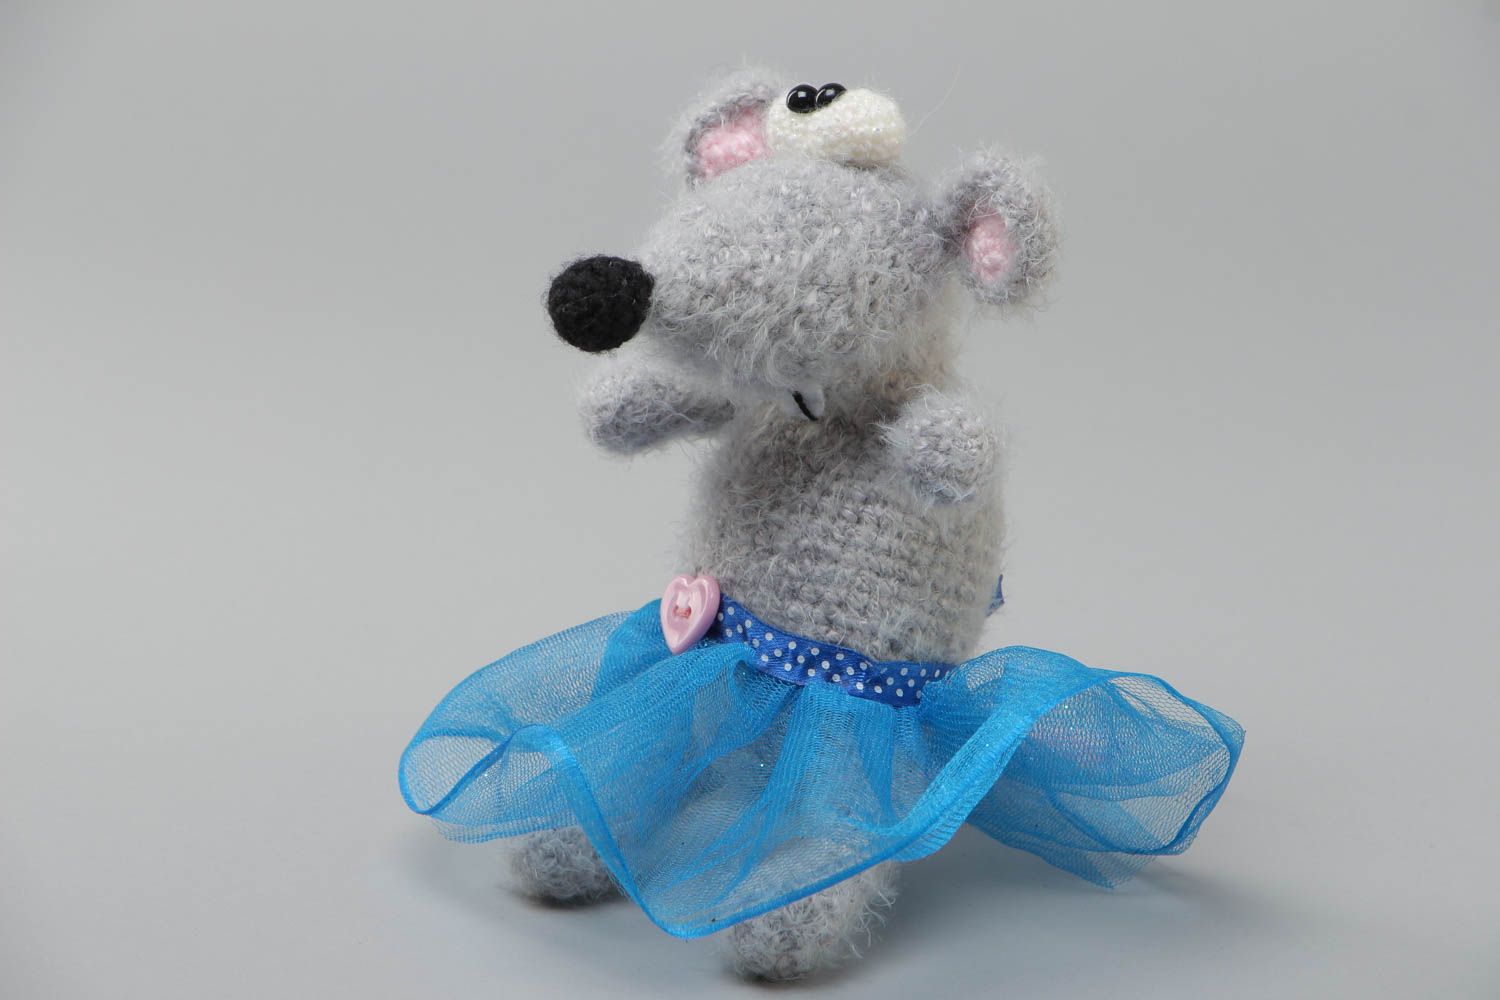 Handmade soft toy crocheted of acrylic threads gray mouse in blue tutu skirt photo 2